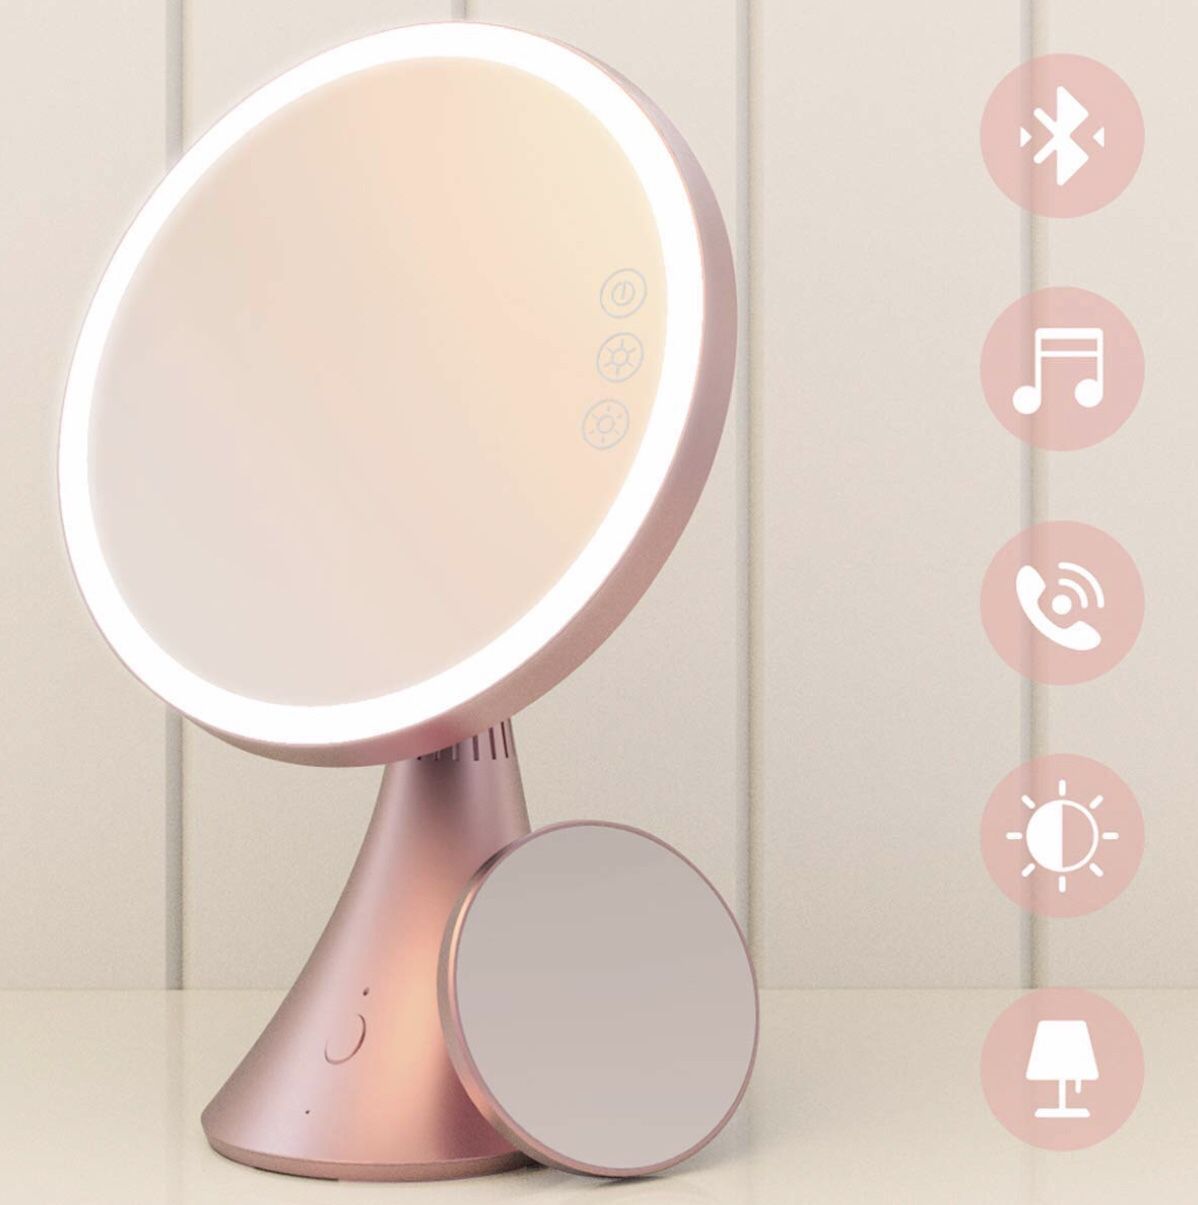 Brand new Lighted Vanity Mirror, 9 Inch Led Makeup Mirror with 5X Magnification, Adjustable Color Temperature & Brightness, Bluetooth Speakerphone Al